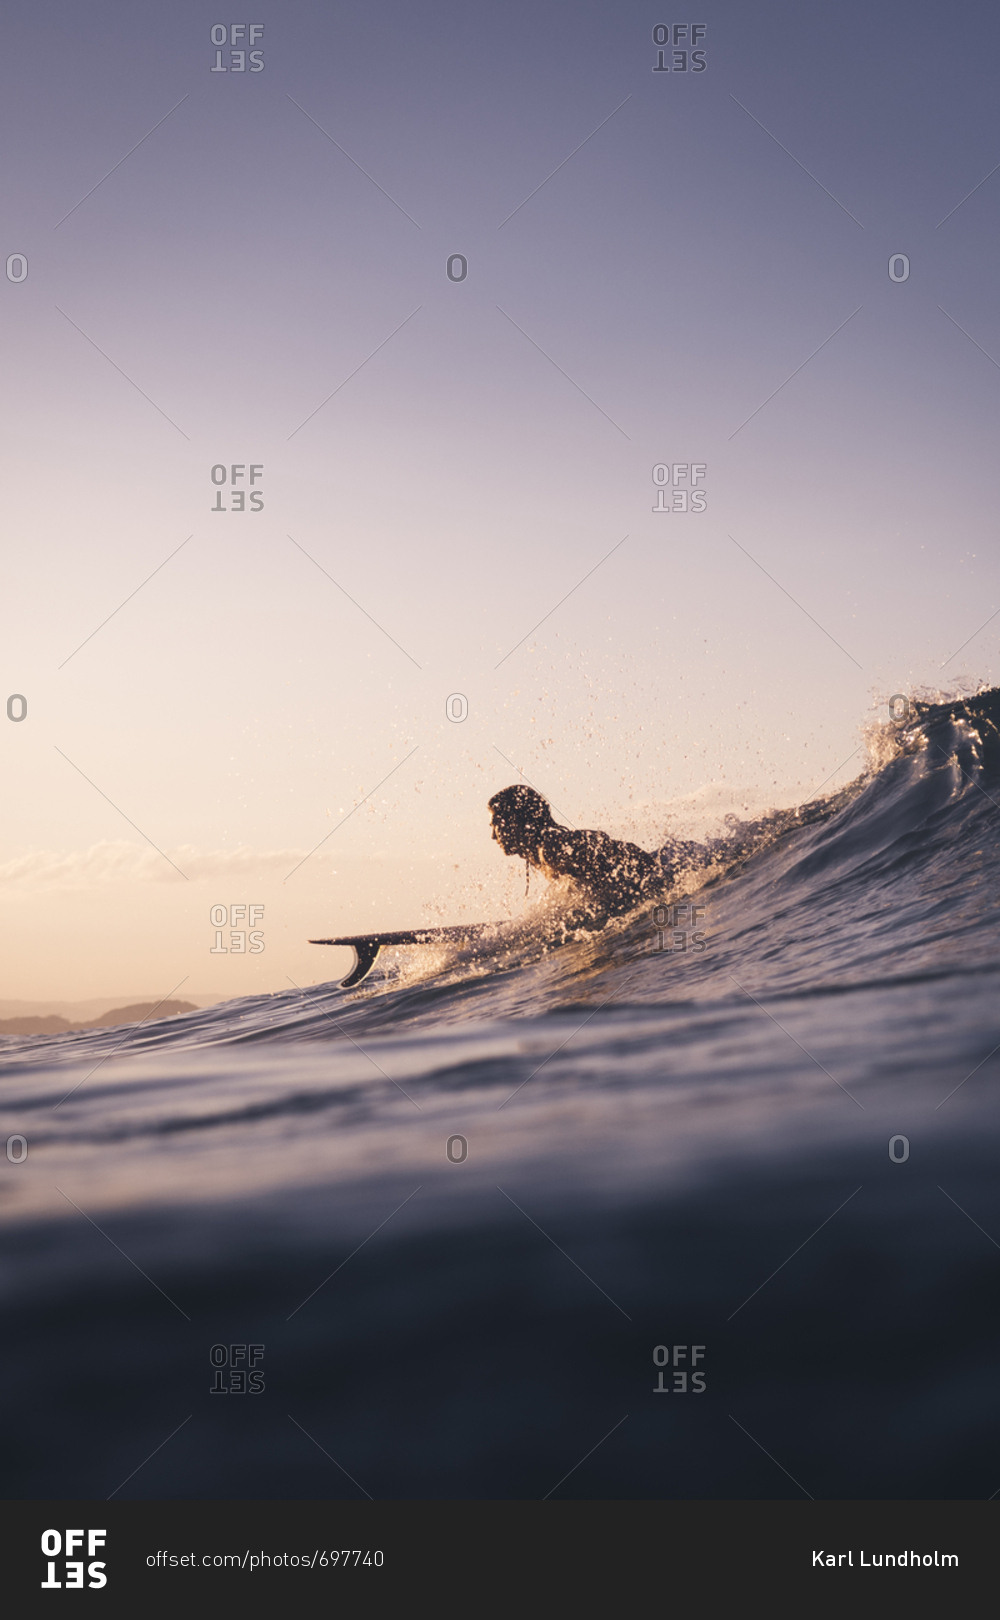 Surfer lying on surfboard while wave is forming and water splashing